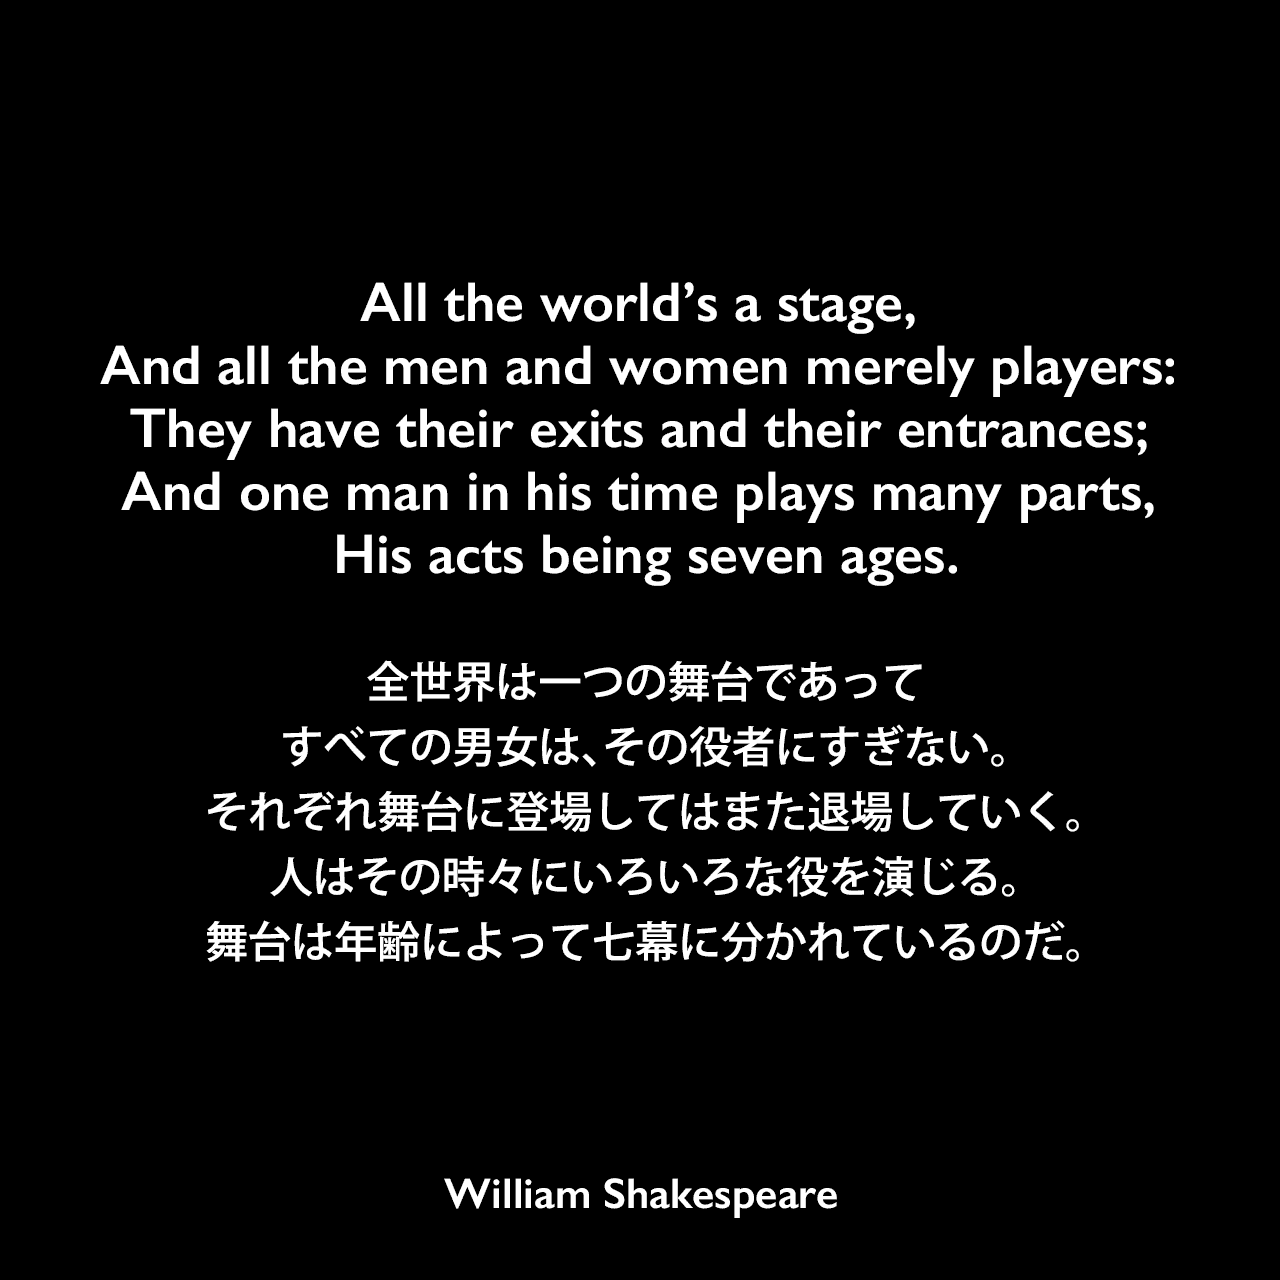 All the world’s a stage, And all the men and women merely players: They have their exits and their entrances; And one man in his time plays many parts, His acts being seven ages.全世界は一つの舞台であって、すべての男女は、その役者にすぎない。それぞれ舞台に登場してはまた退場していく。人はその時々にいろいろな役を演じる。舞台は年齢によって七幕に分かれているのだ。William Shakespeare